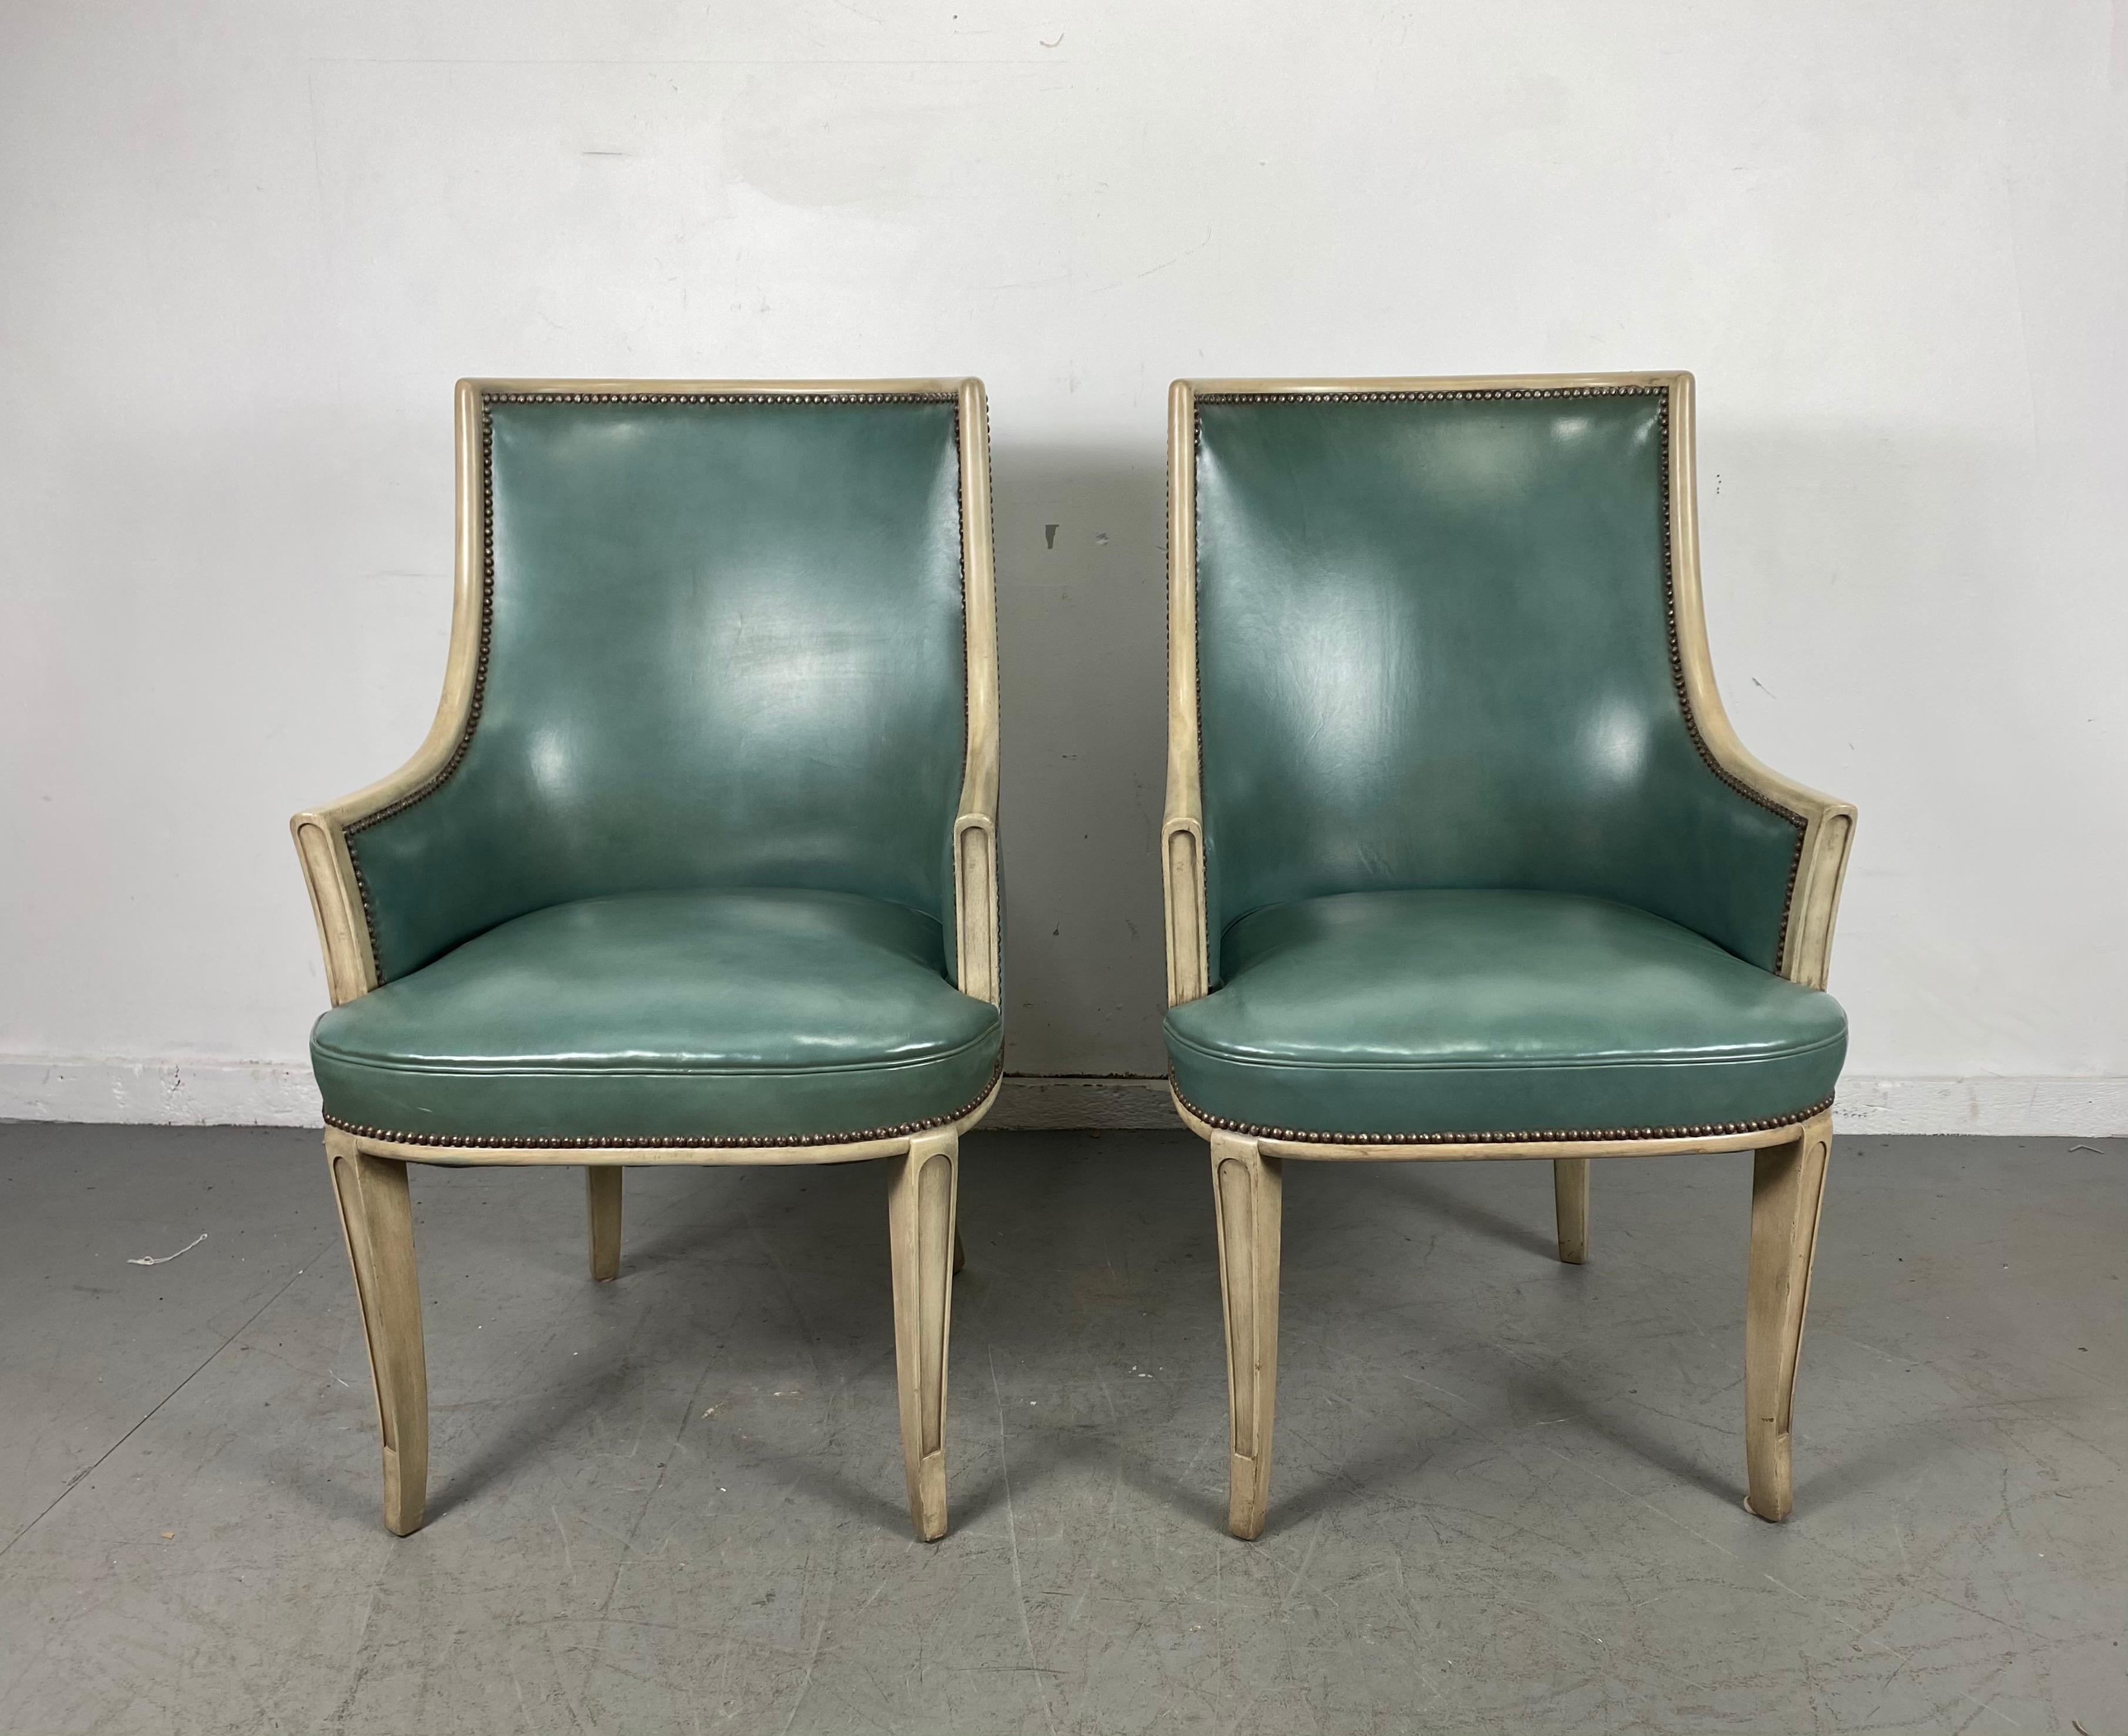 Pair of French Modern- Regency leather arm / lounge chairs, attributed to Baker Furniture Co. superior quality and construction, amazing color, blue/green leather, stunning pickled/ cerused frames. Extremely comfortable. 25